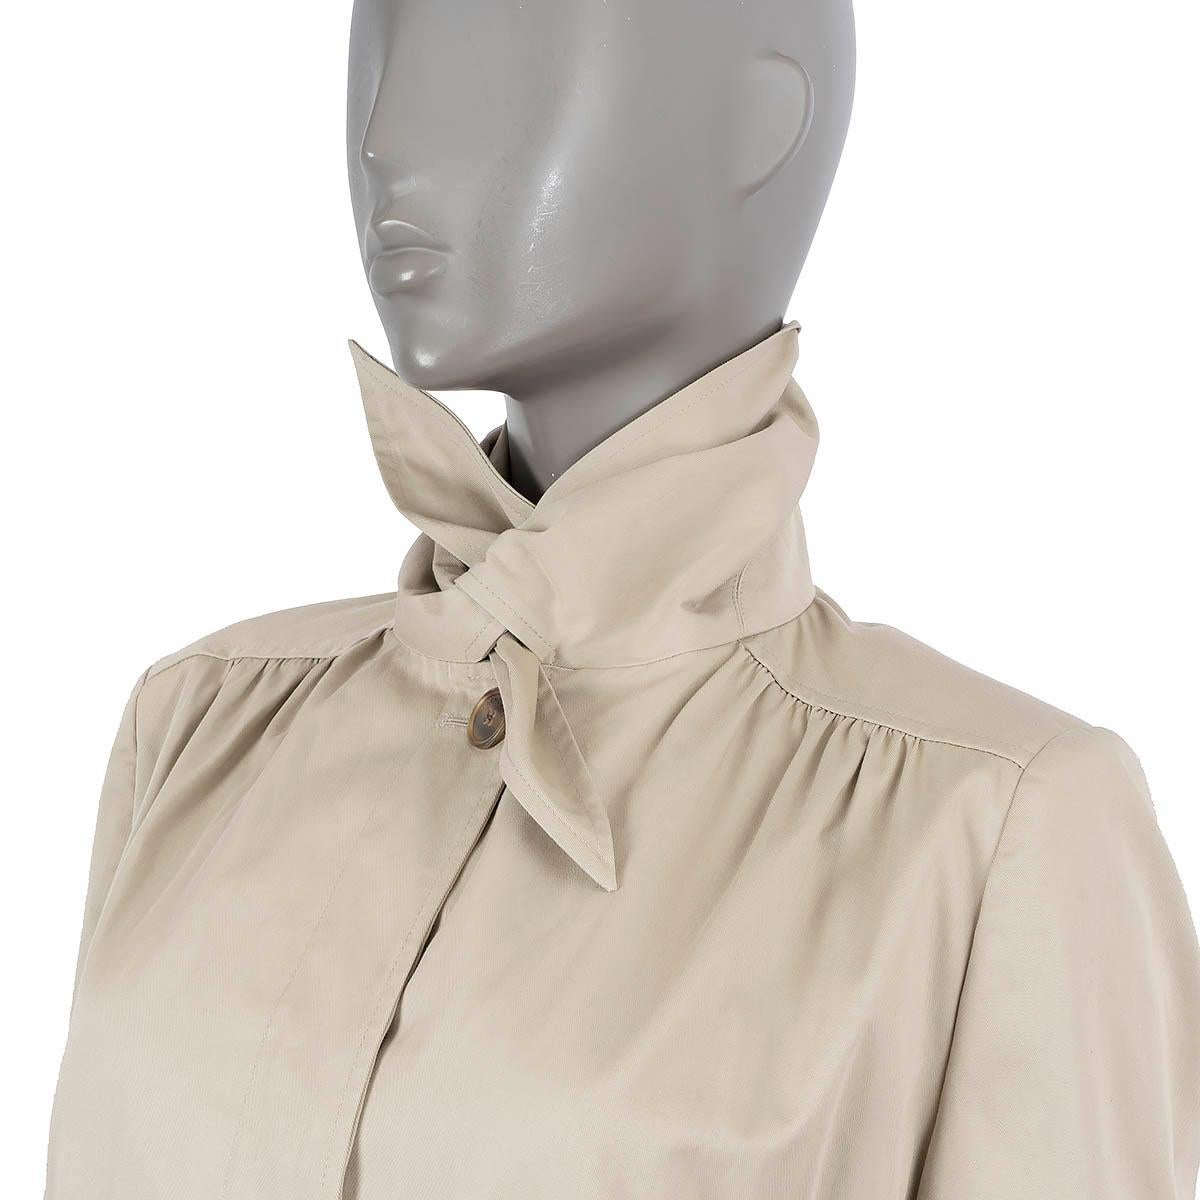 BALENCIAGA beige cotton 2017 SCARF TRENCH Coat Jacket 40 M For Sale 5